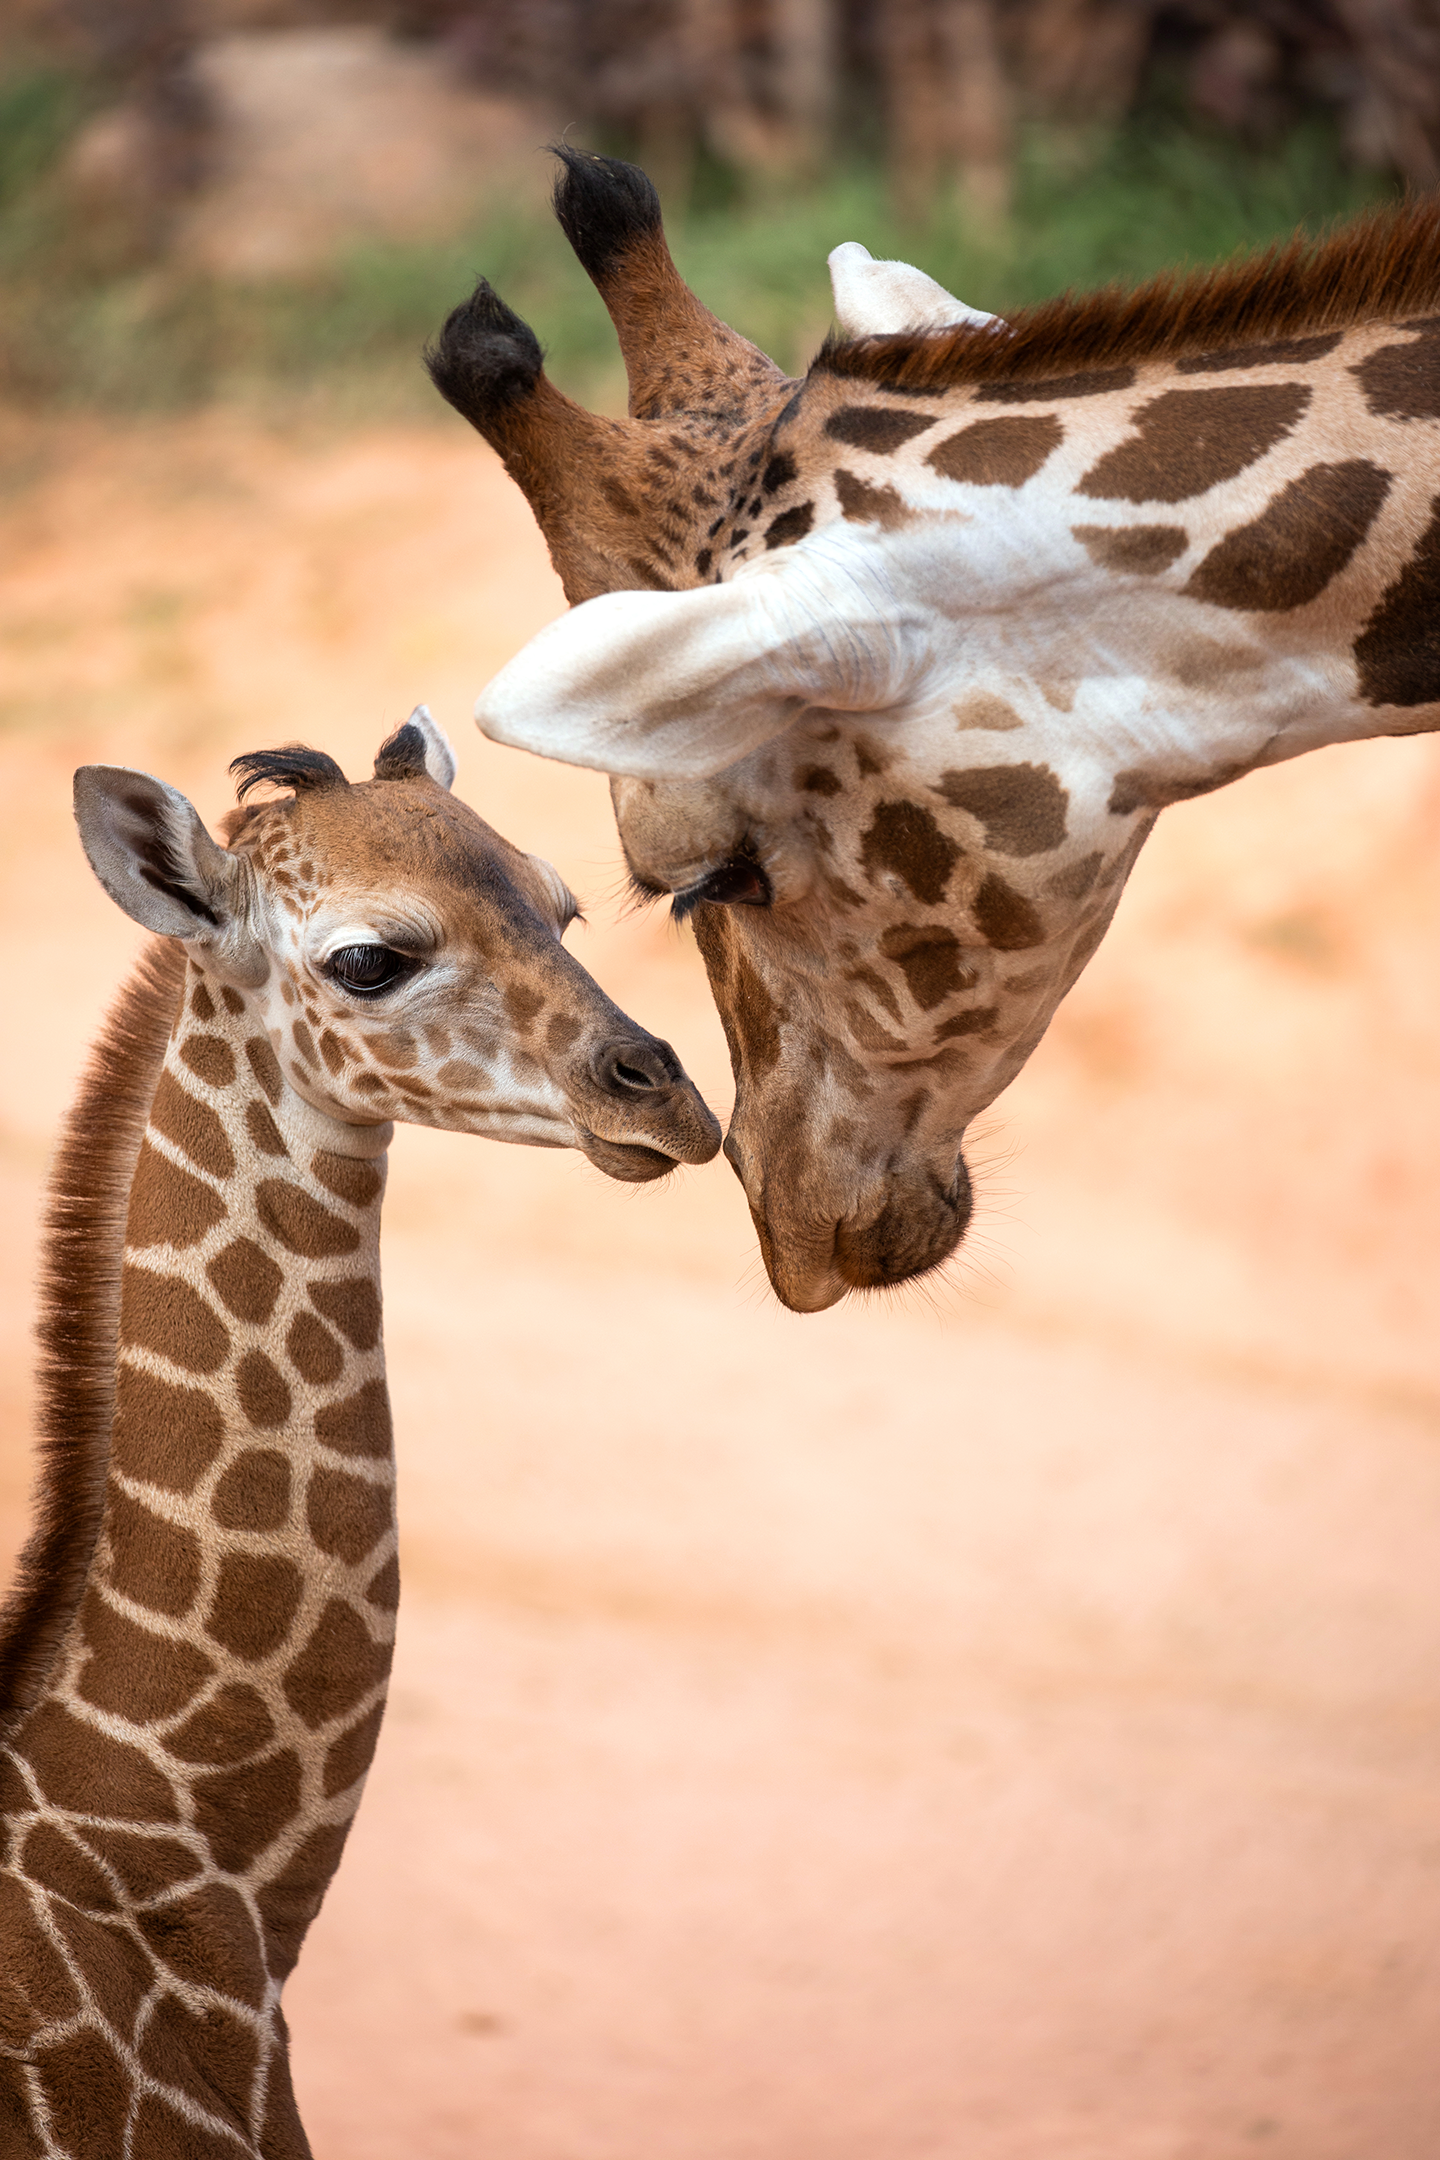 10Best voting image of Bailey's giraffe calf BB and her mom greeting